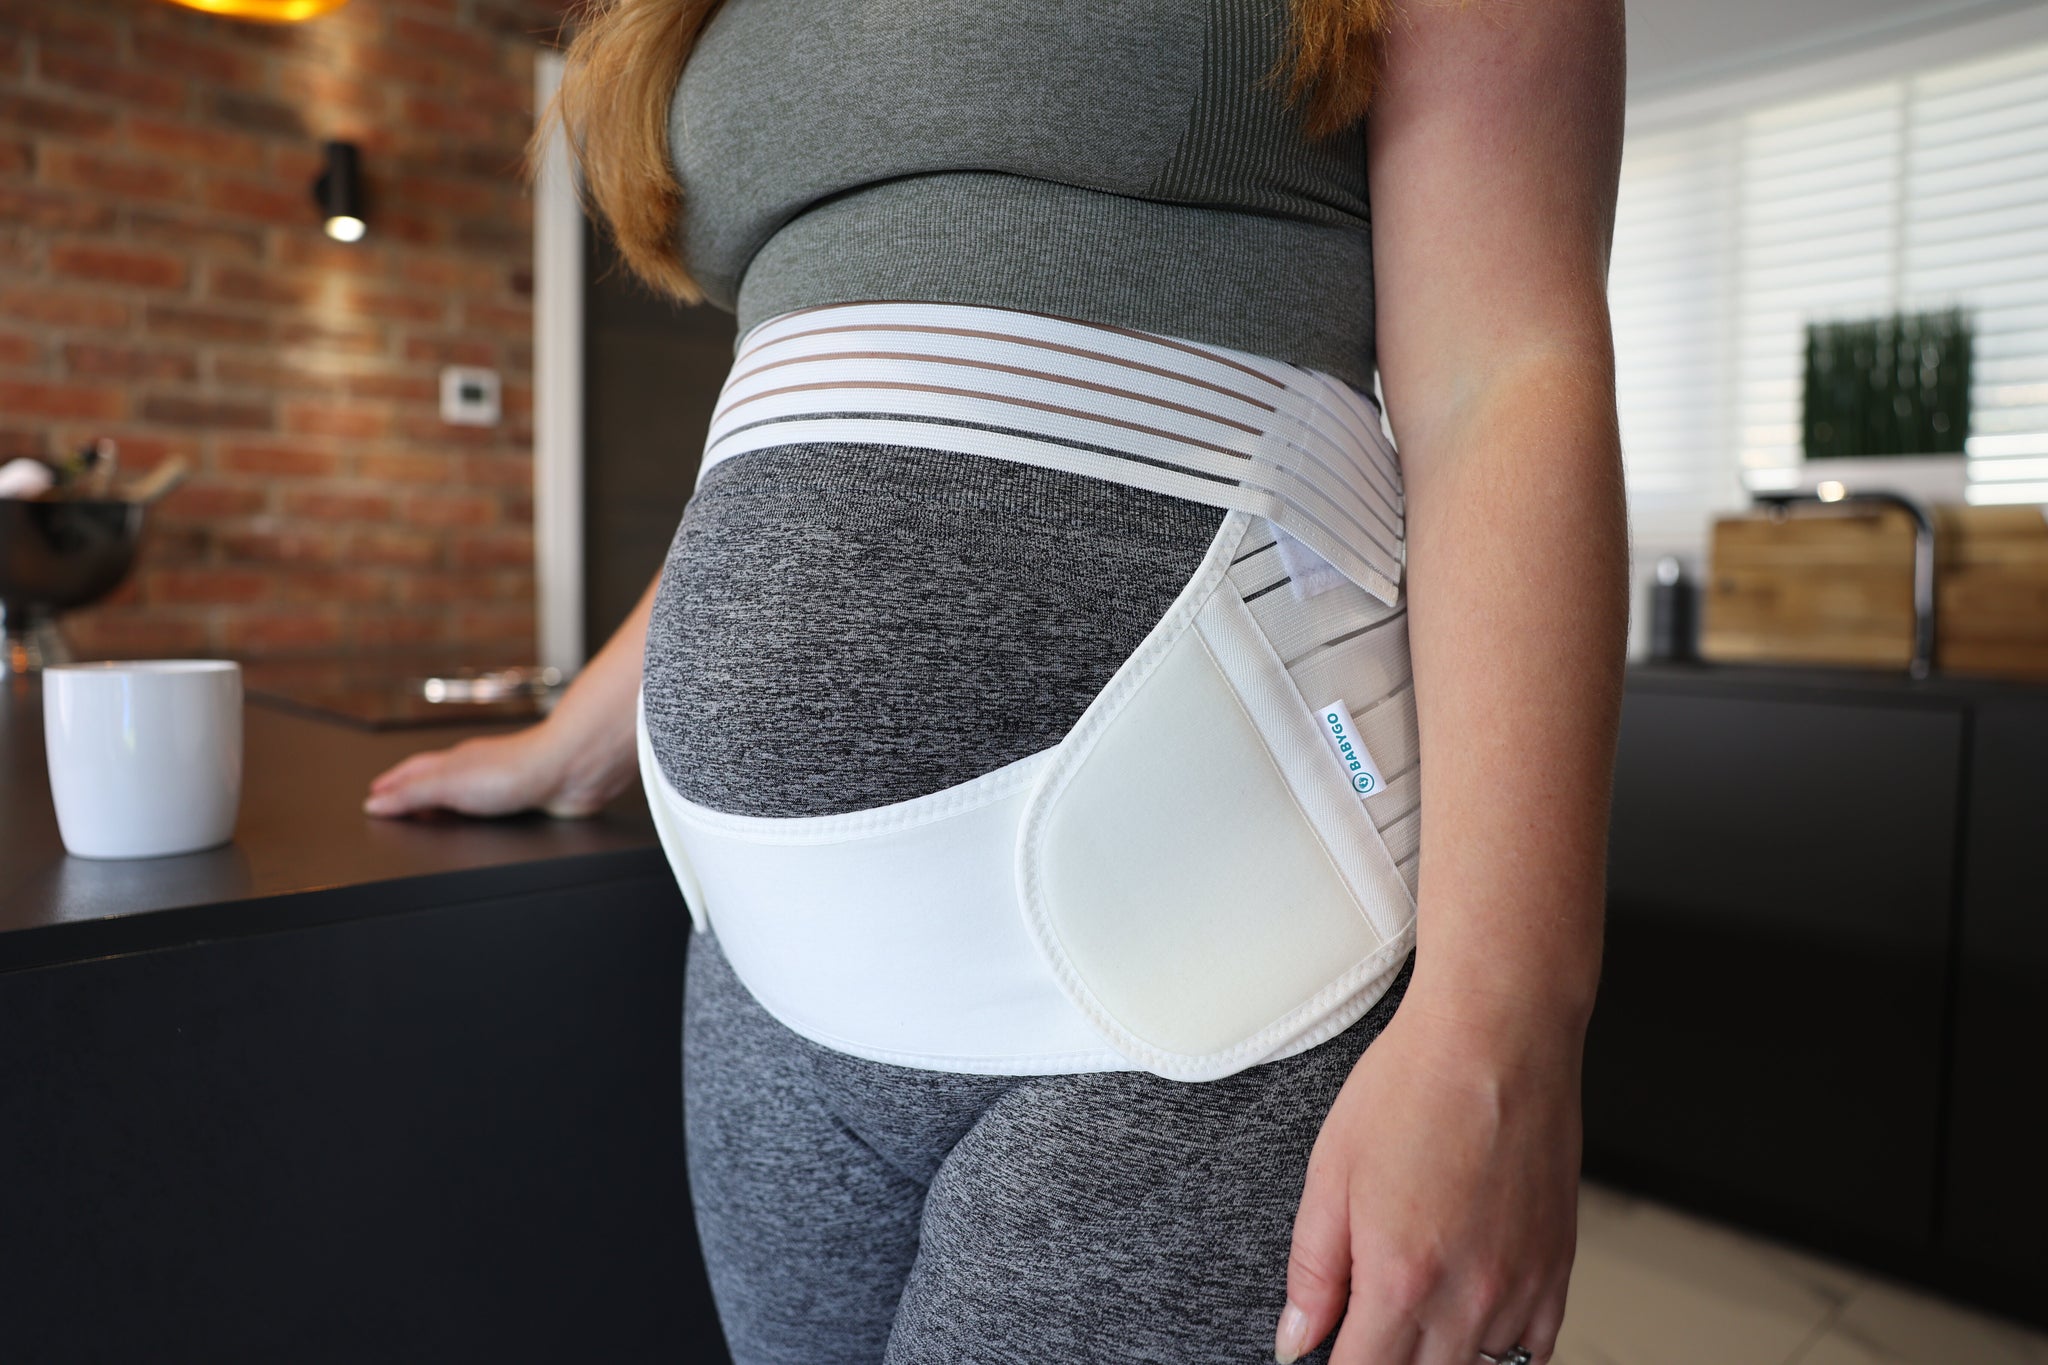 pregnant-woman-wearing-support-belt-in-pregnancy